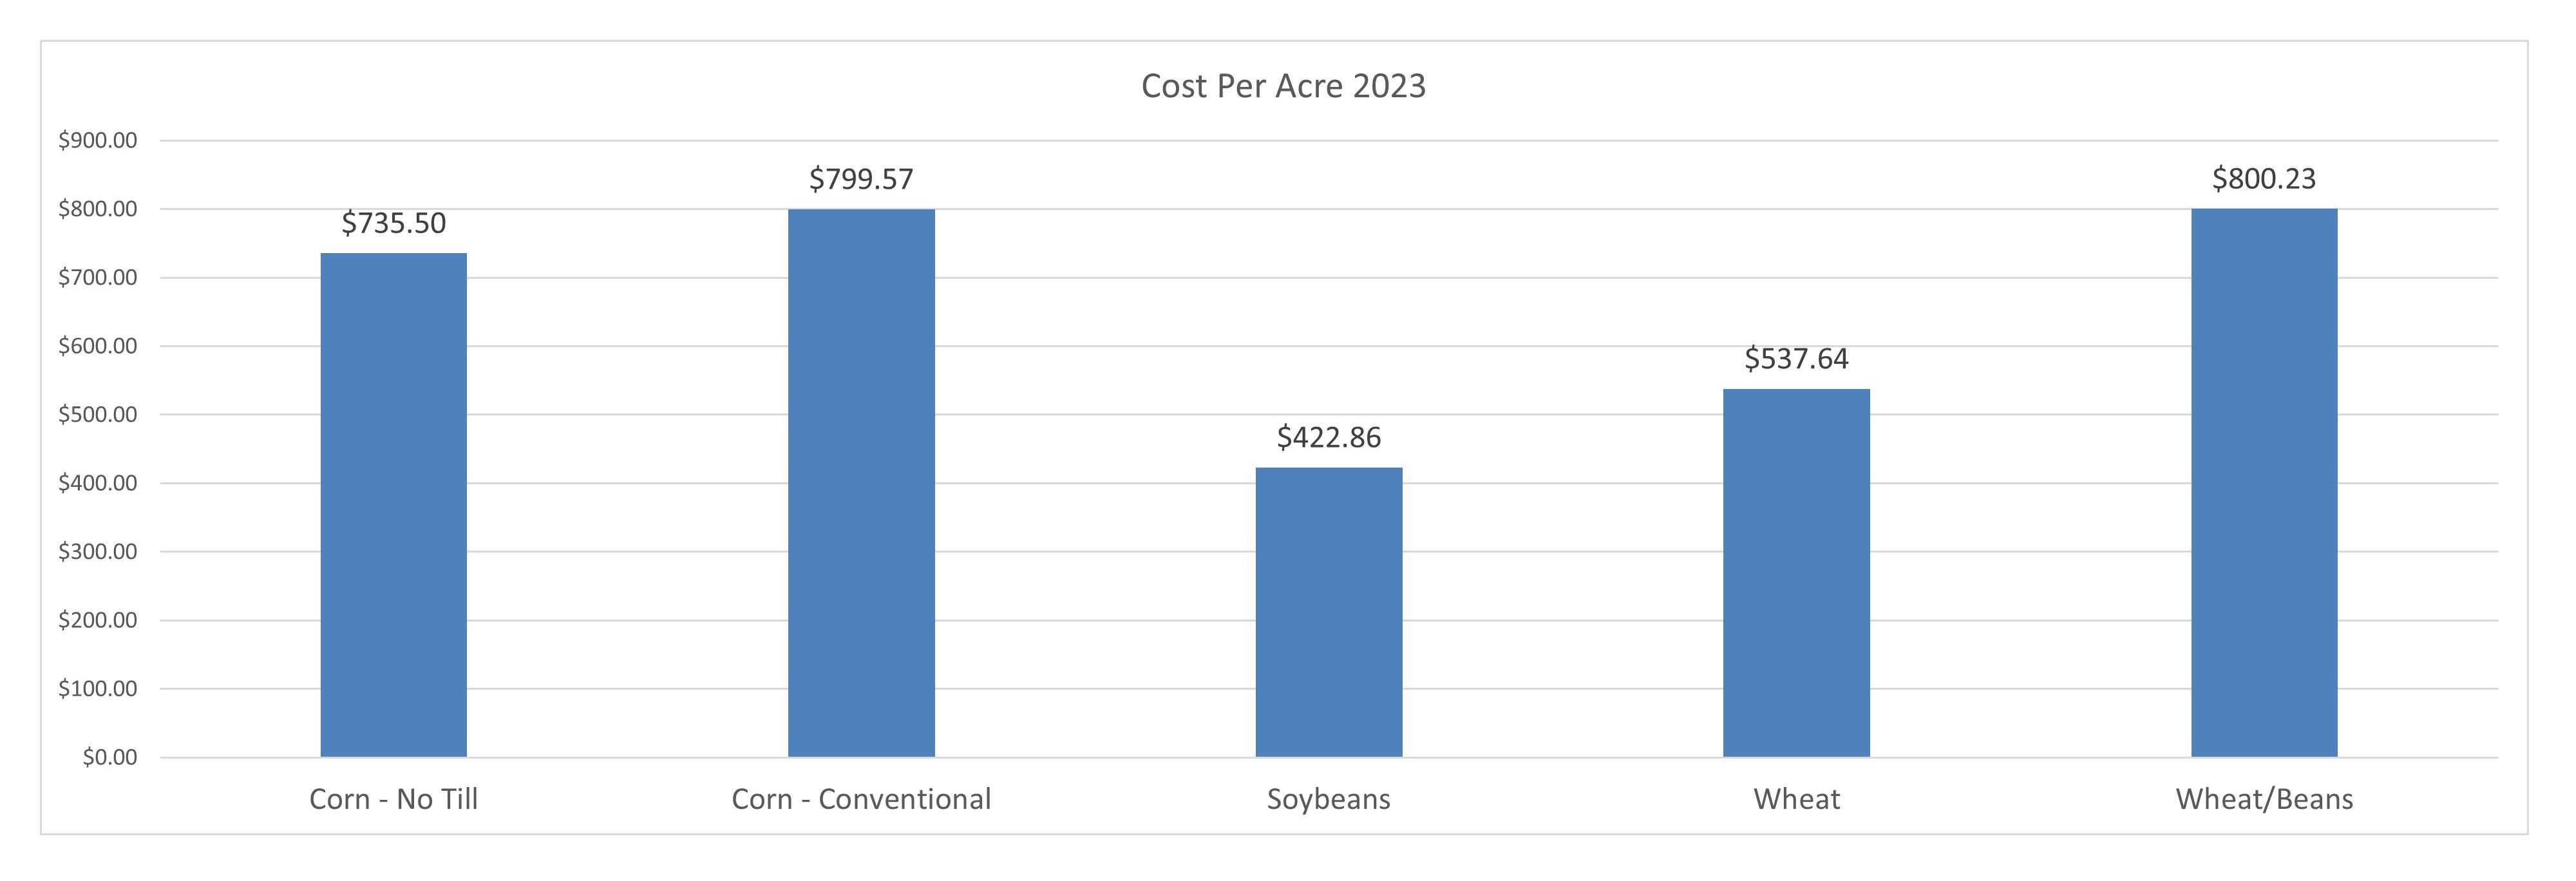 Bar graph cost per acre for 2023 for corn, soybeans, and wheat